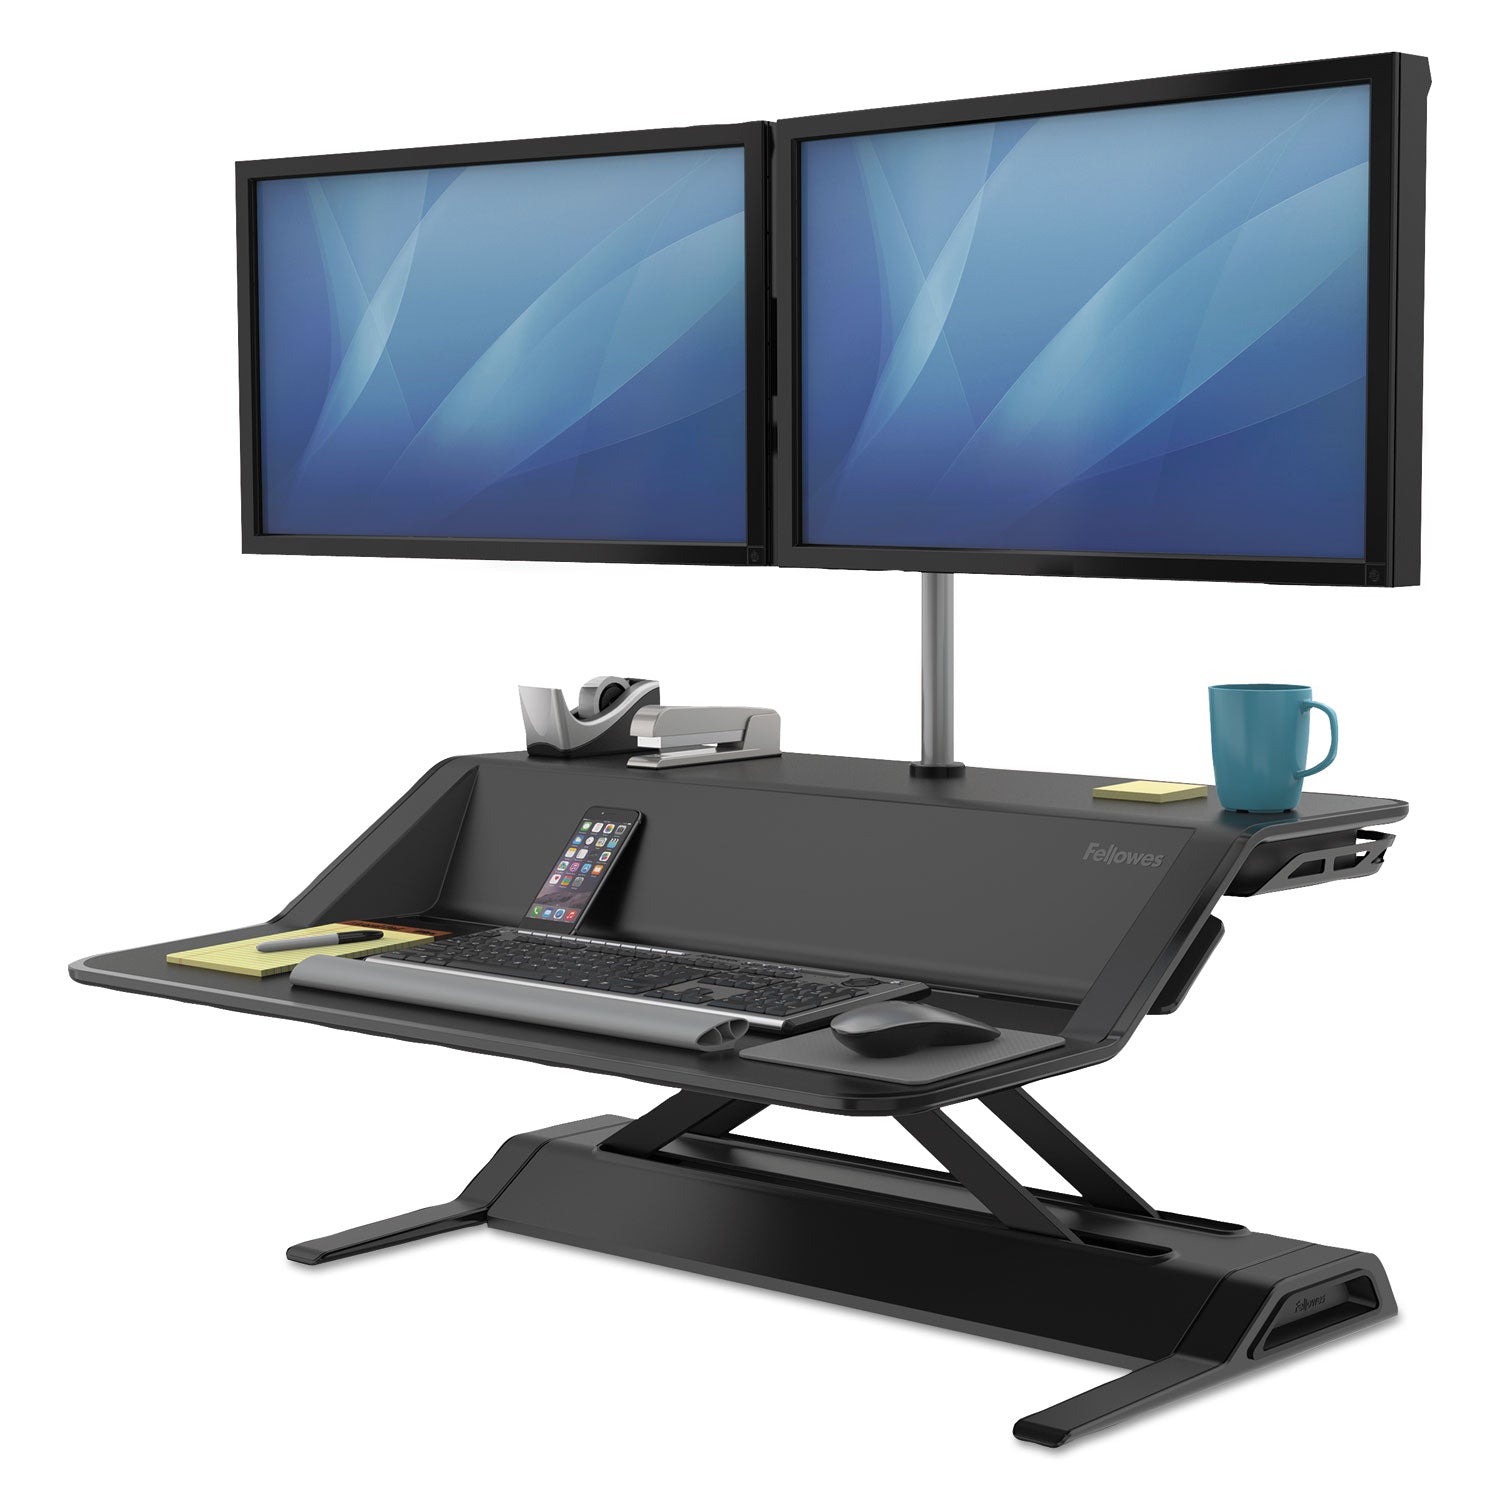 Lotus Sit-Stands Workstation, 32.75" x 24.25" x 5.5" to 22.5", Black - 7